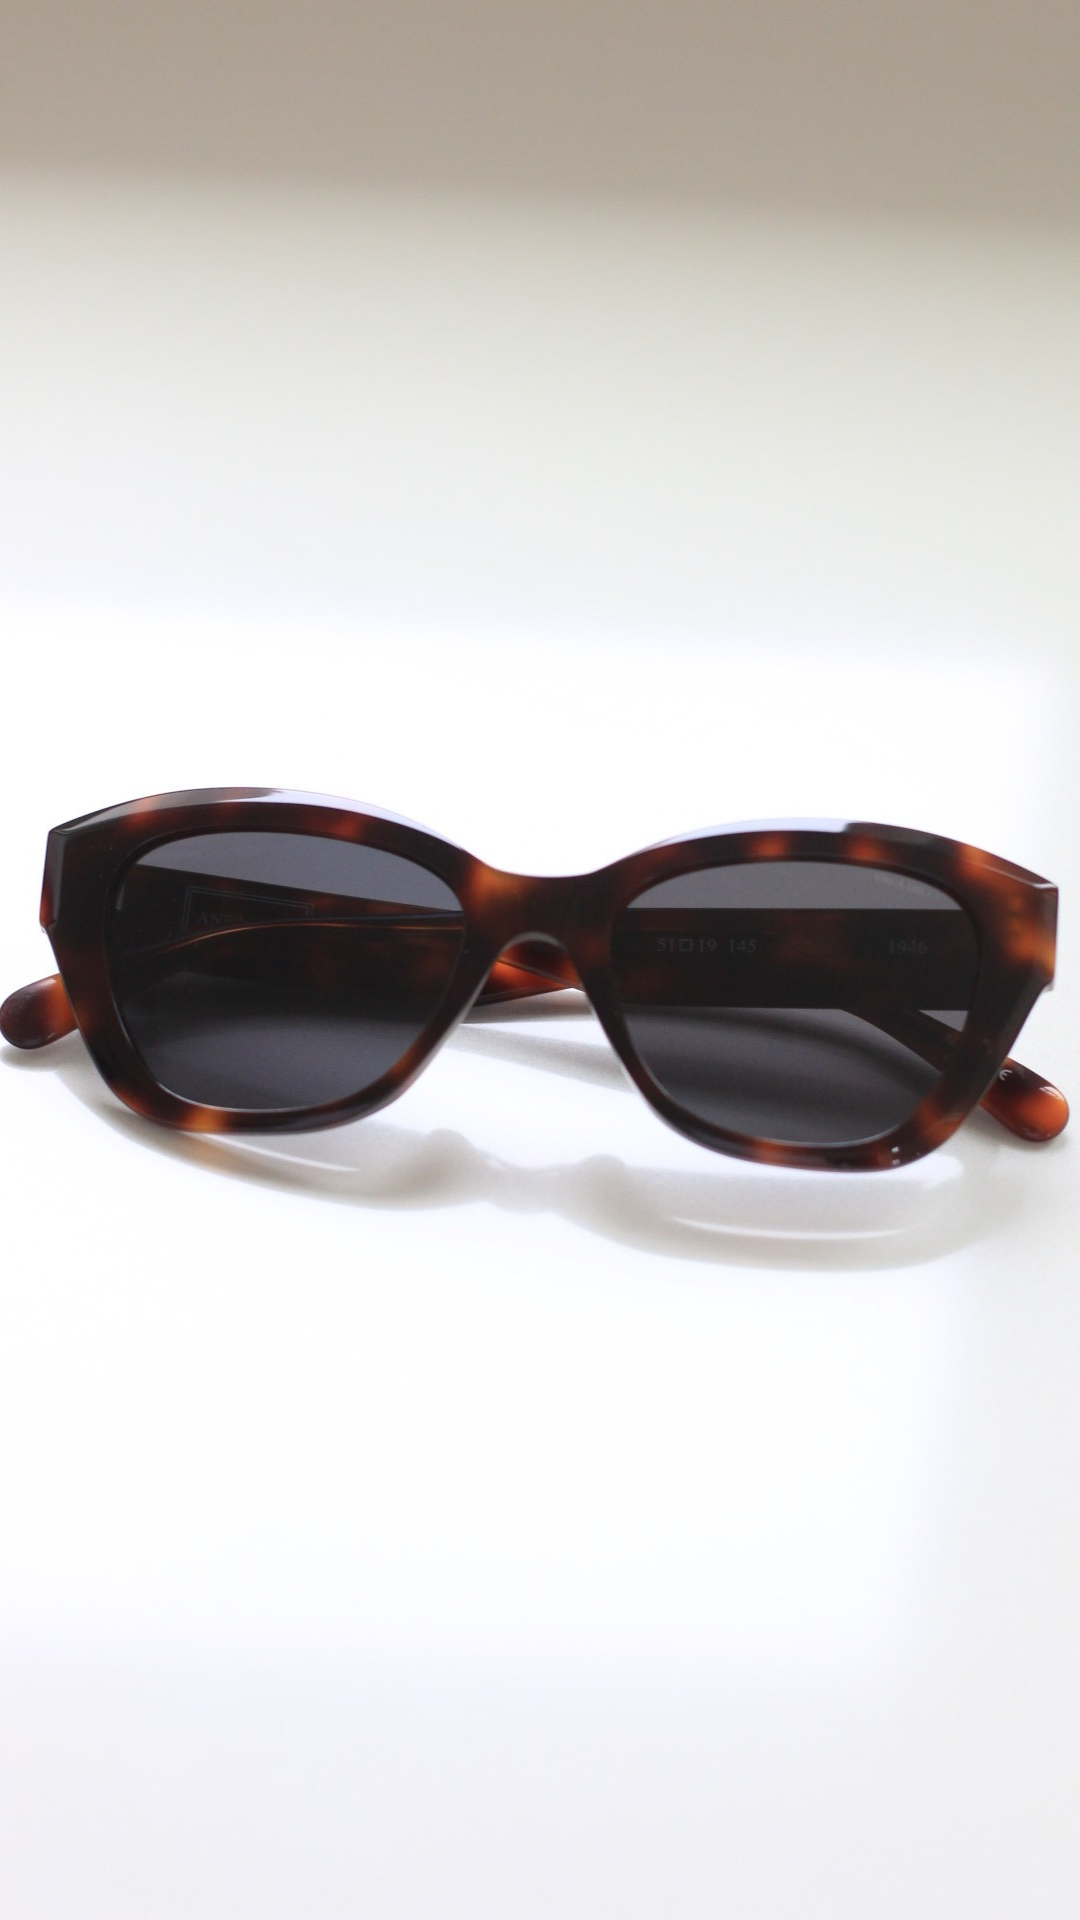  Pictured:  1946 cateye sunglasses. Discover ANEA HILL, a top choice for Best Women Sunglass Brand.